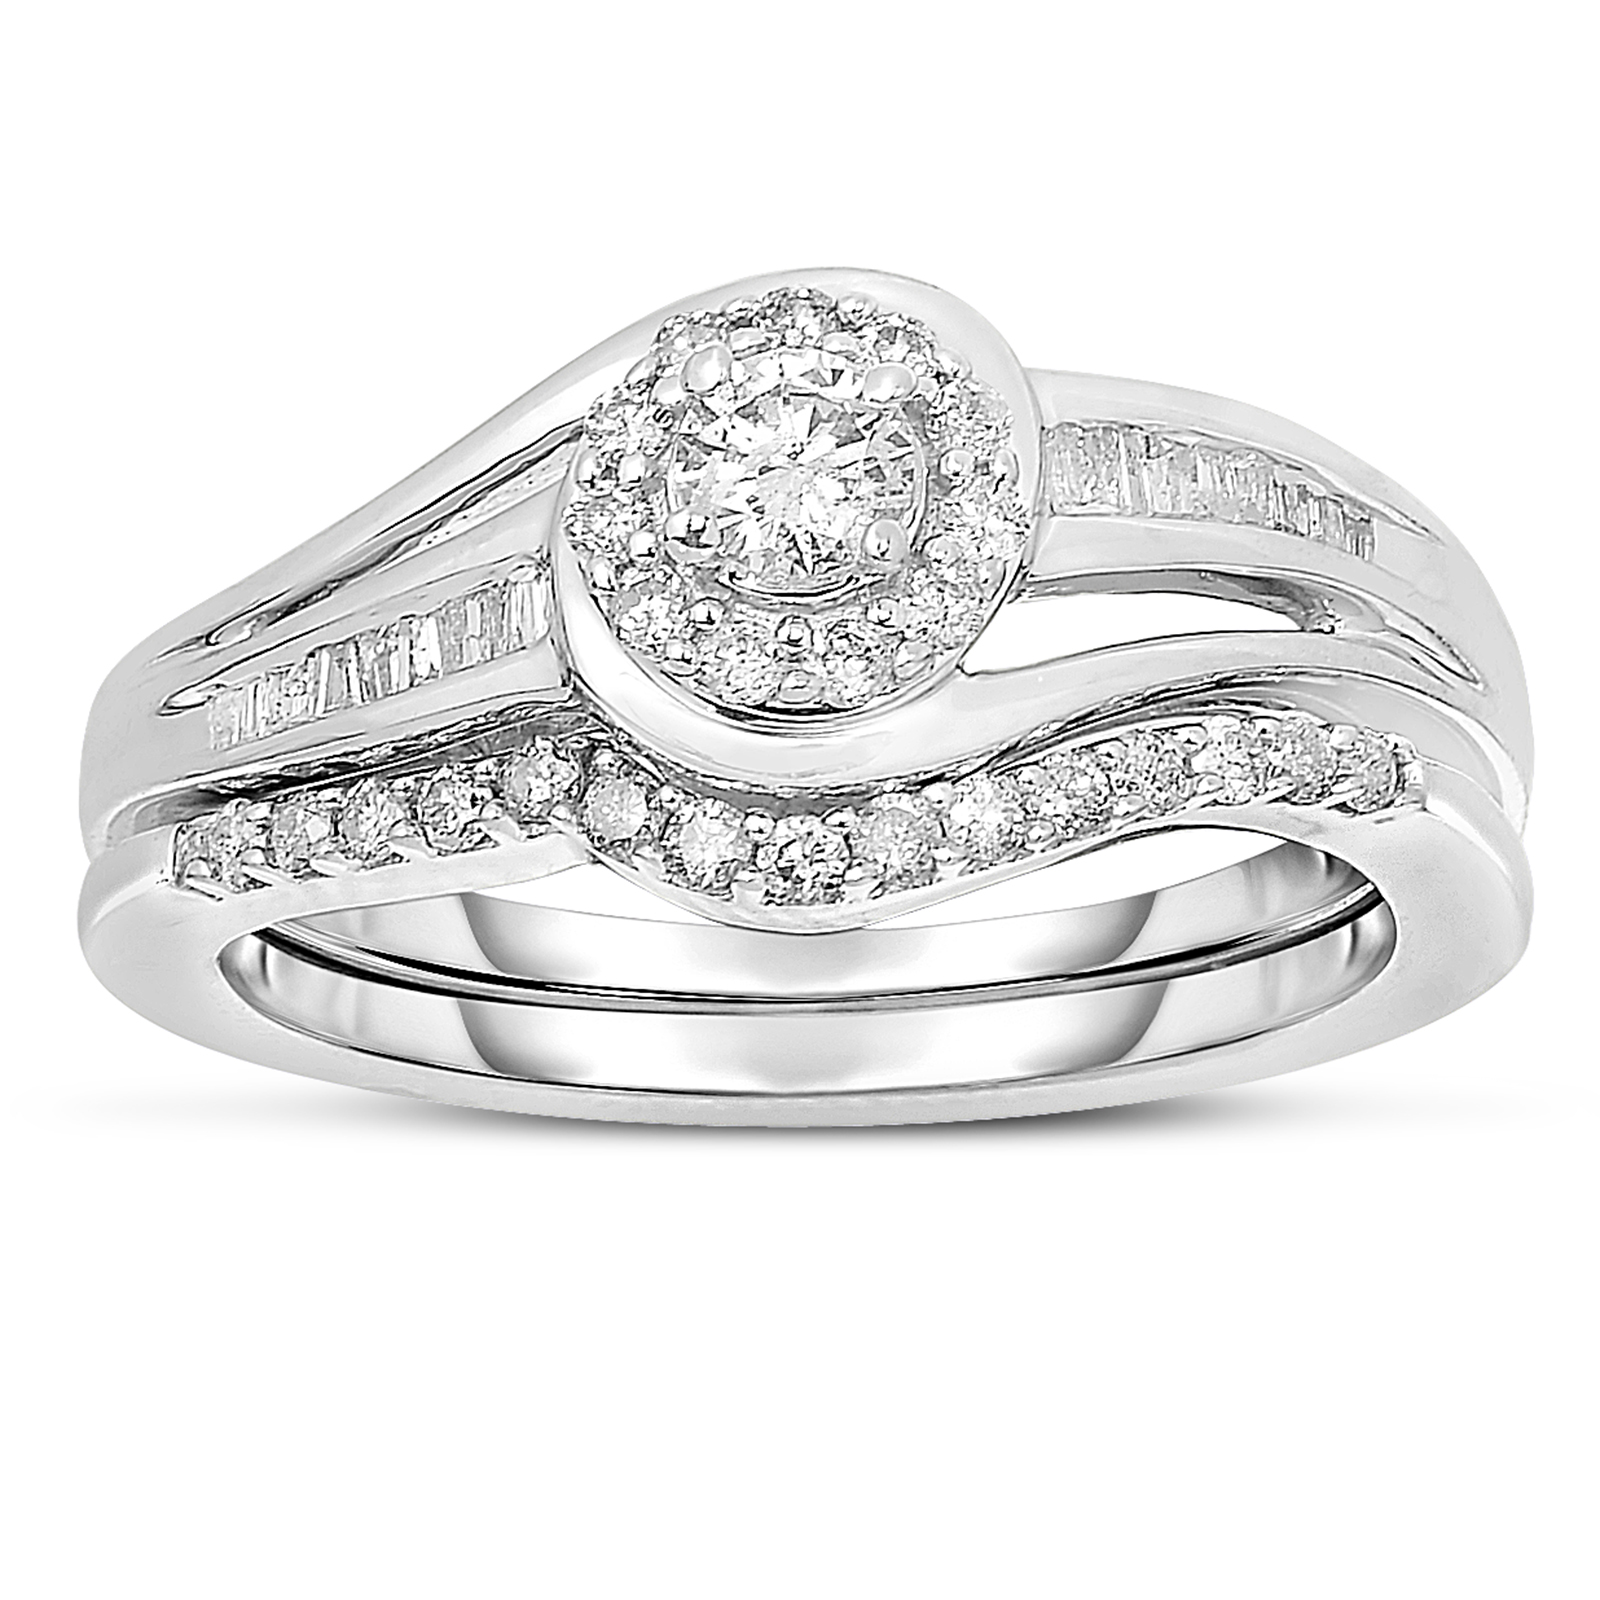 Linked In Love Platin&#233;e 1/2cttw  Diamond Bridal Set - Size 7 Only